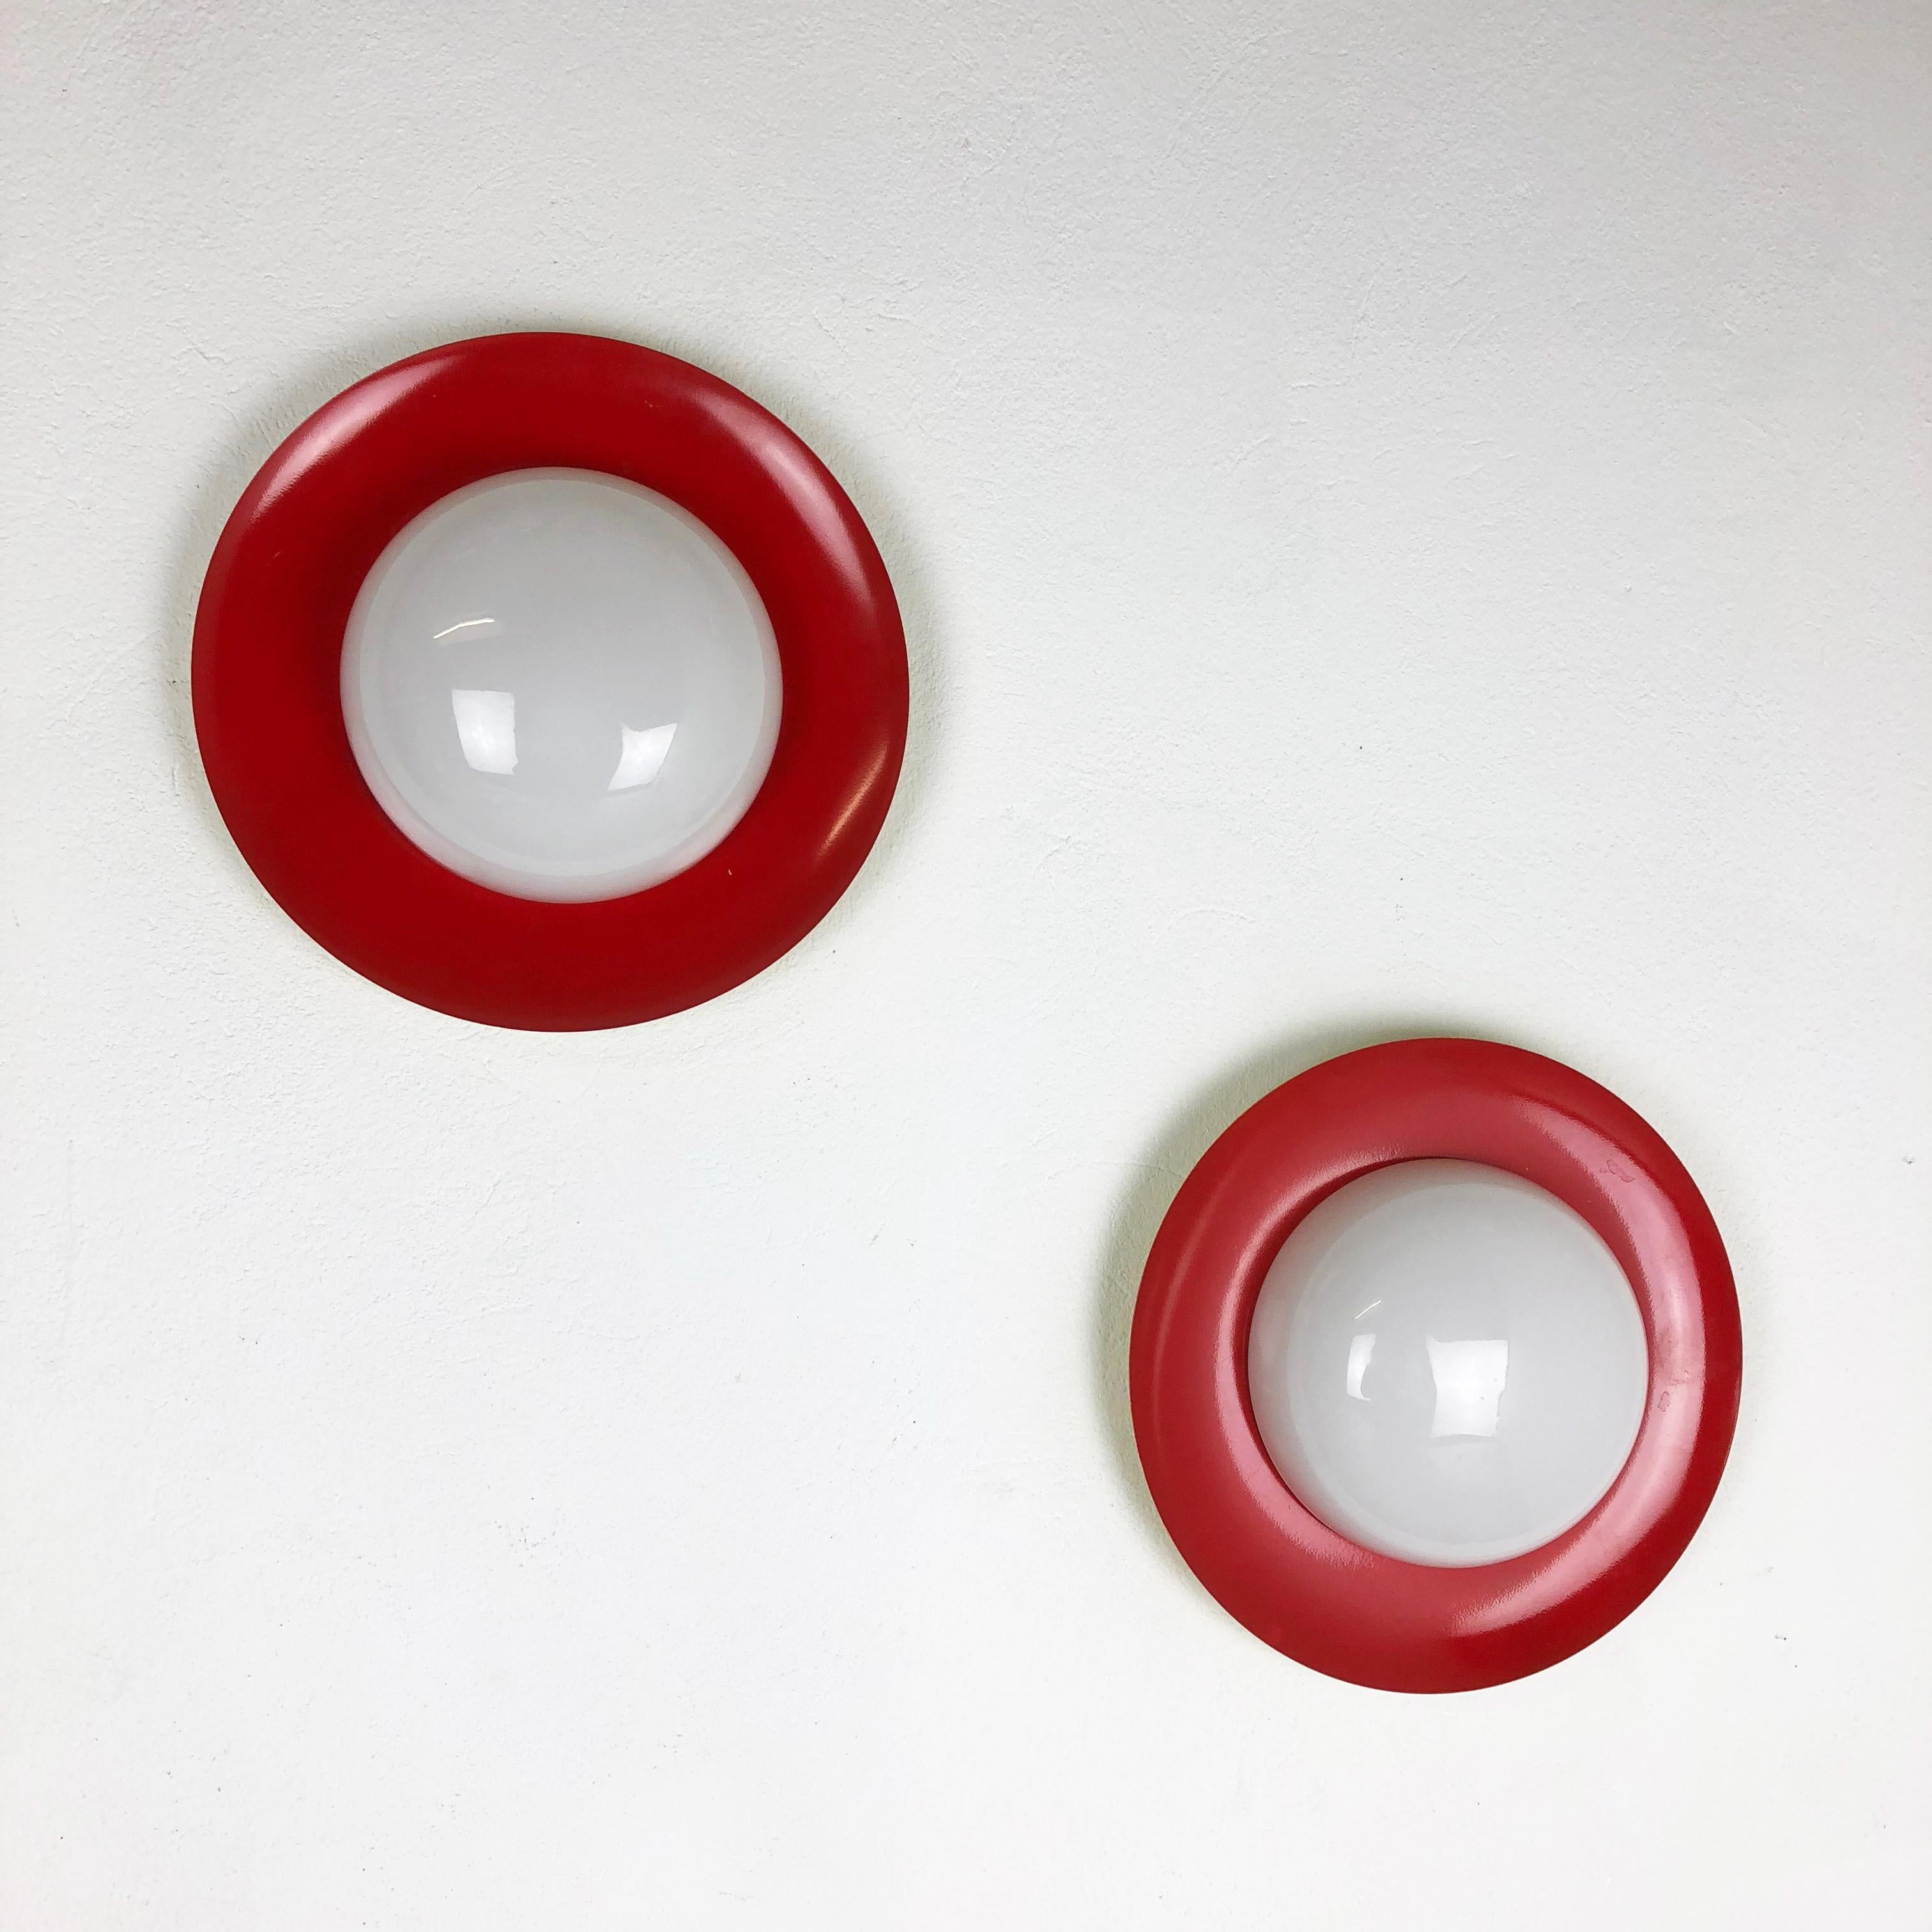 Article:

Wall lights sconces with opal glass shades.



Origin:

Italy



Age:

1960s



Description:


Set of two original 1960s modernist Italian wall lights made of solid metal in red and yellow lacquer tone and opal glass